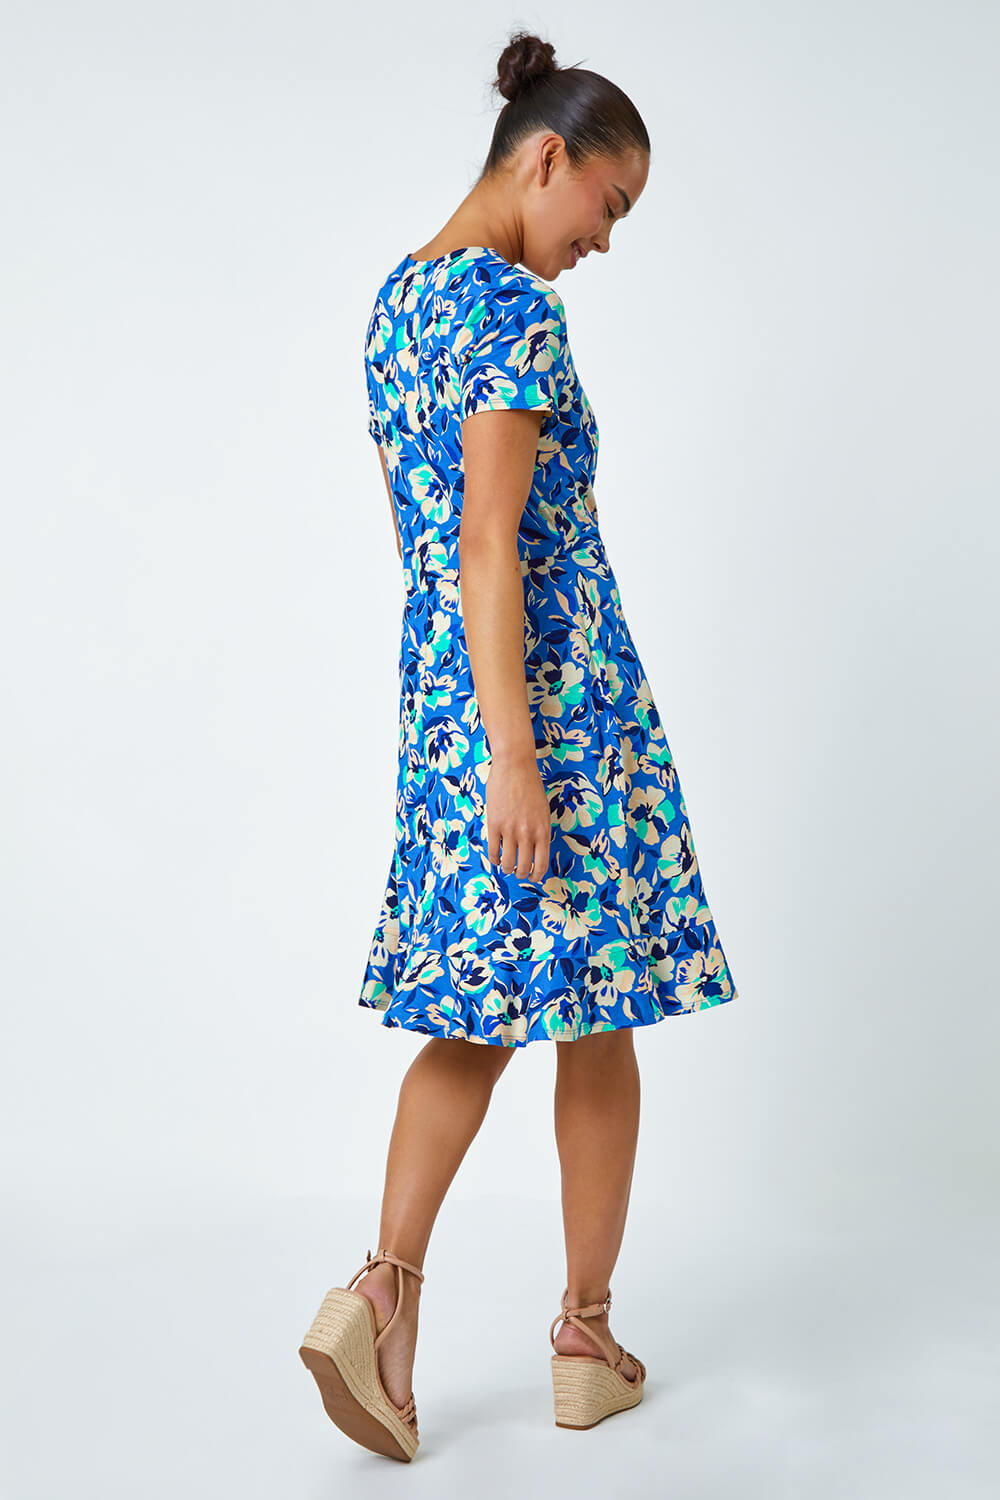 Turquoise Petite Floral Stretch Wrap Dress, Image 3 of 5